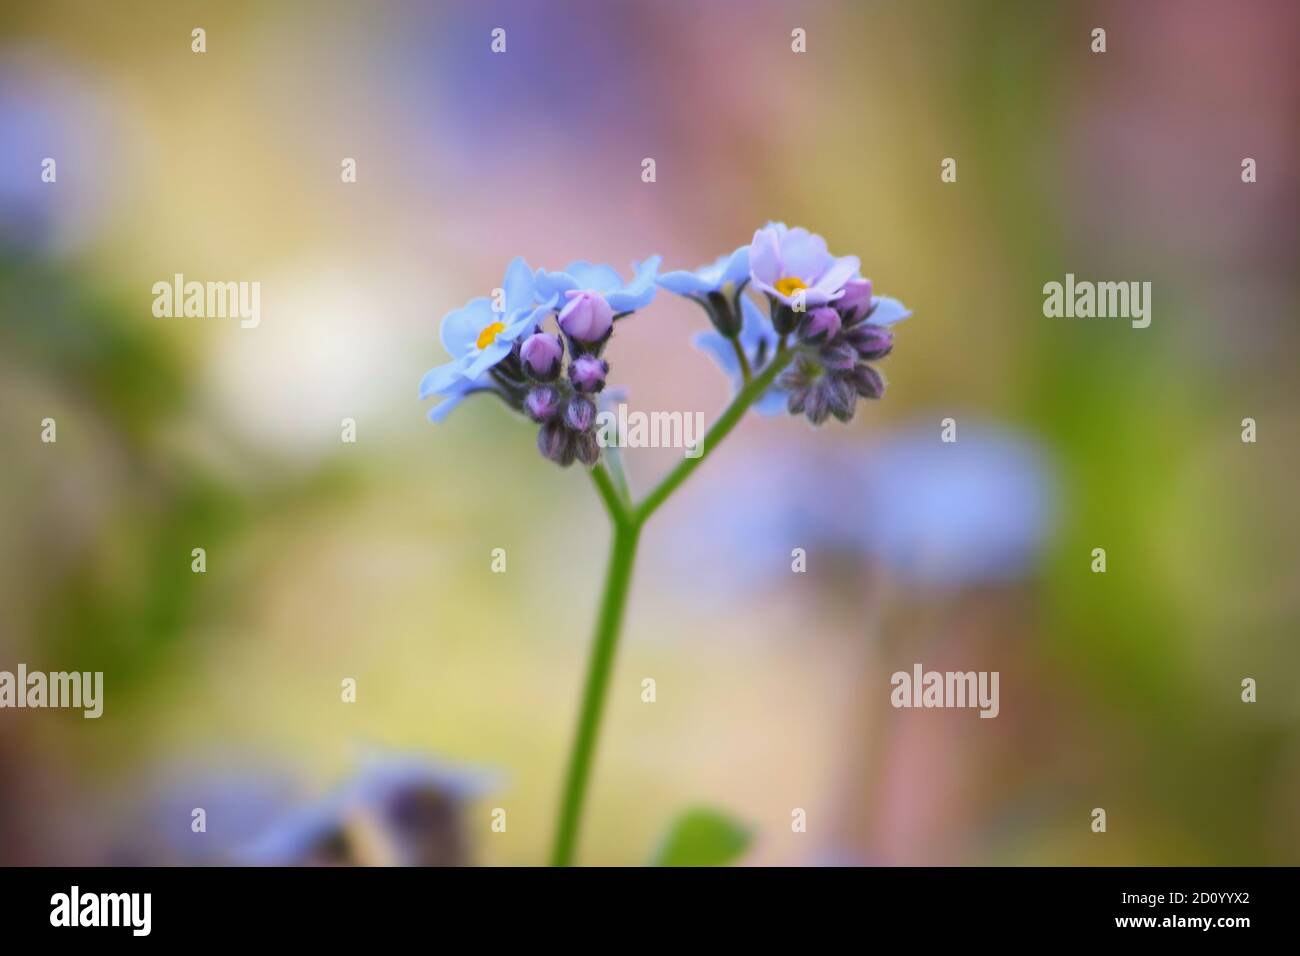 Forget-me-not blue flowers extreme close up against green blurred background Stock Photo